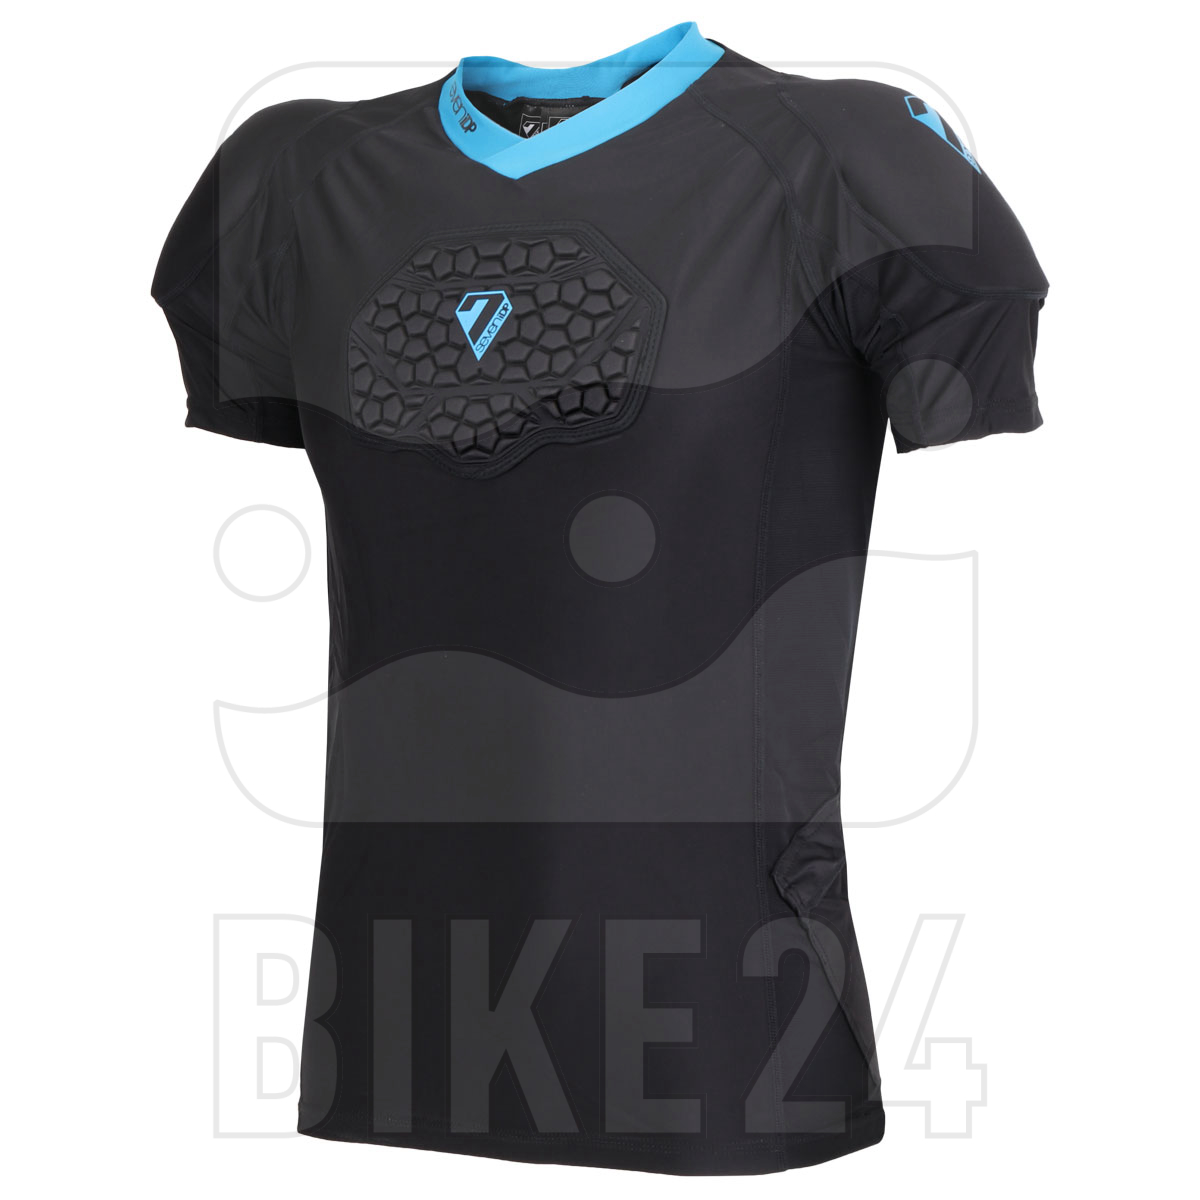 Image of 7 Protection 7iDP Flex Body Suit Protector T-Shirt - black-blue